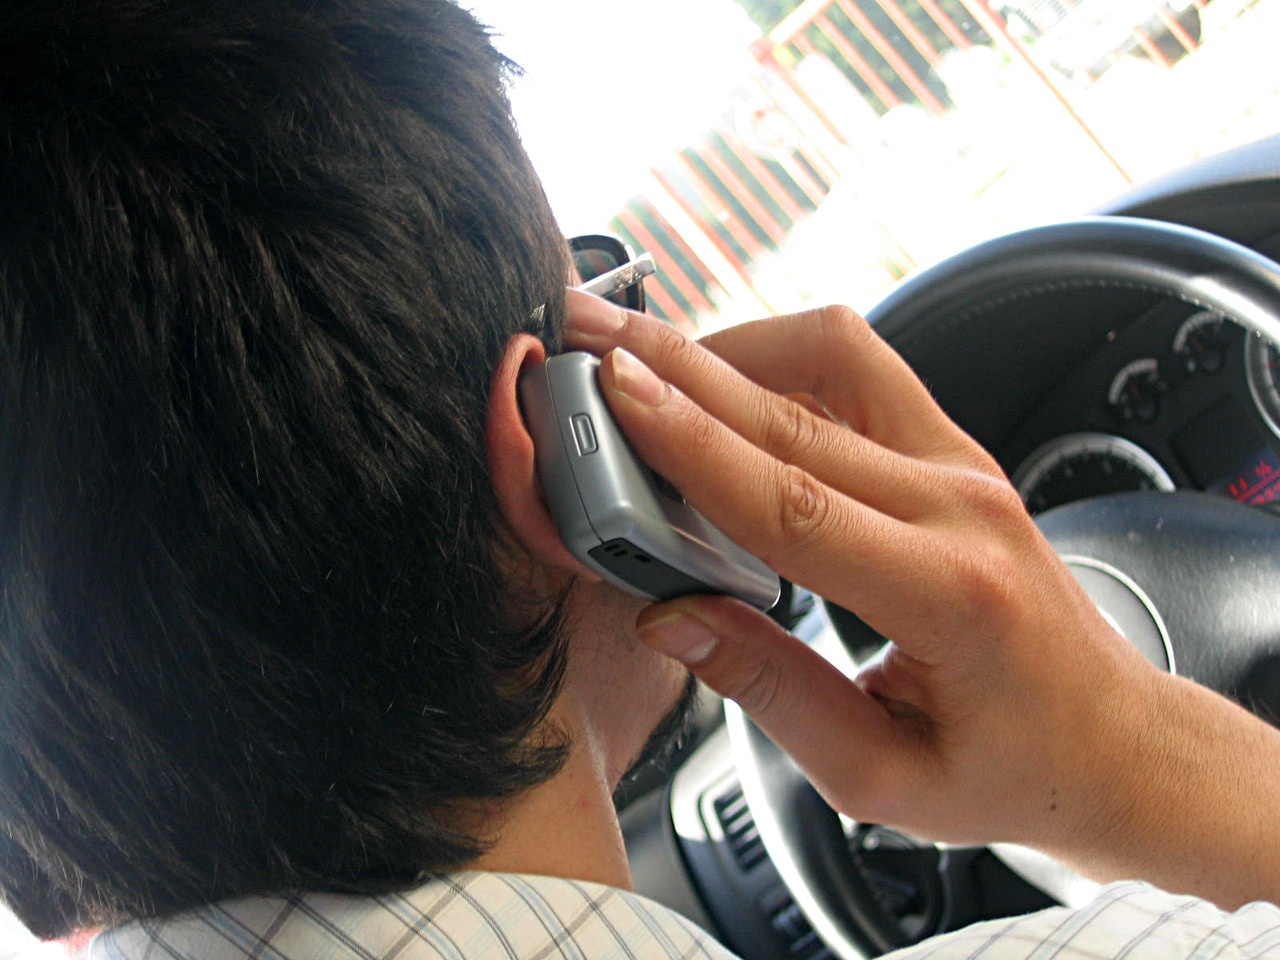 Use of handheld mobile phone while driving: 1 in 6 drivers admits to it